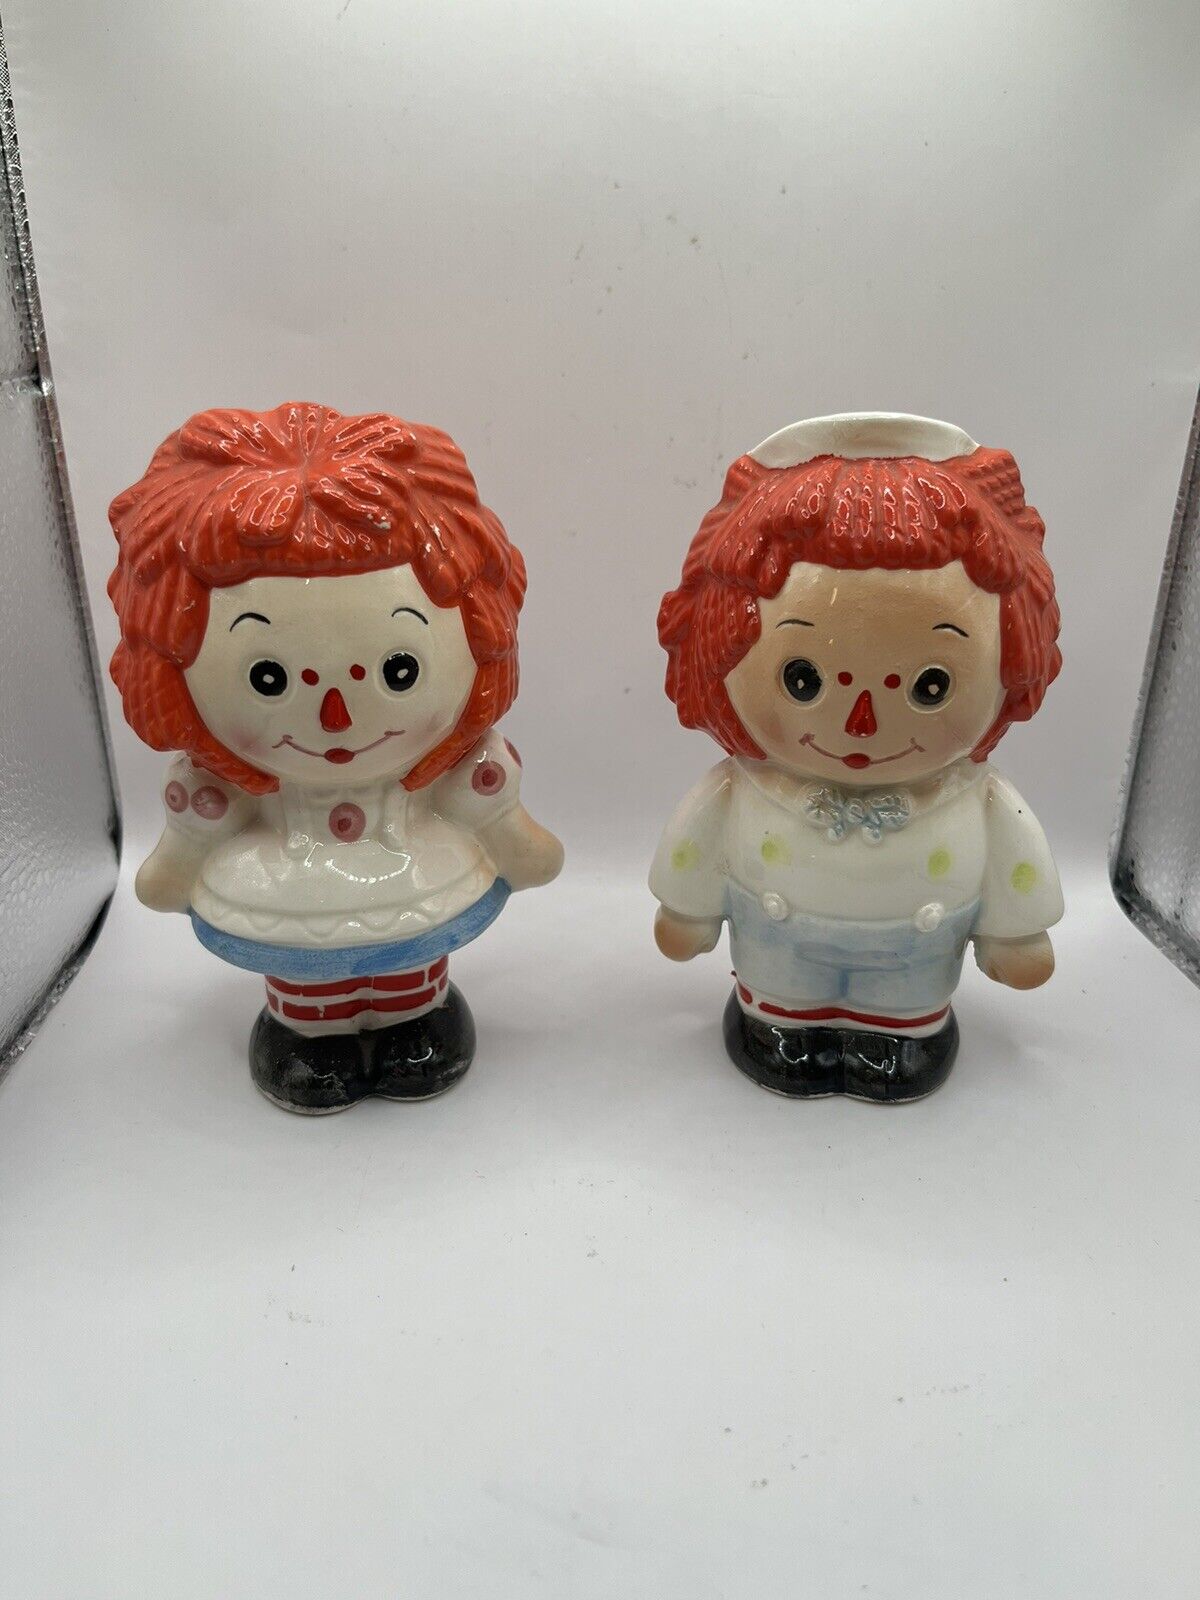 Vintage Raggedy Ann & Andy Salt and Pepper Shakers. Made in JAPAN